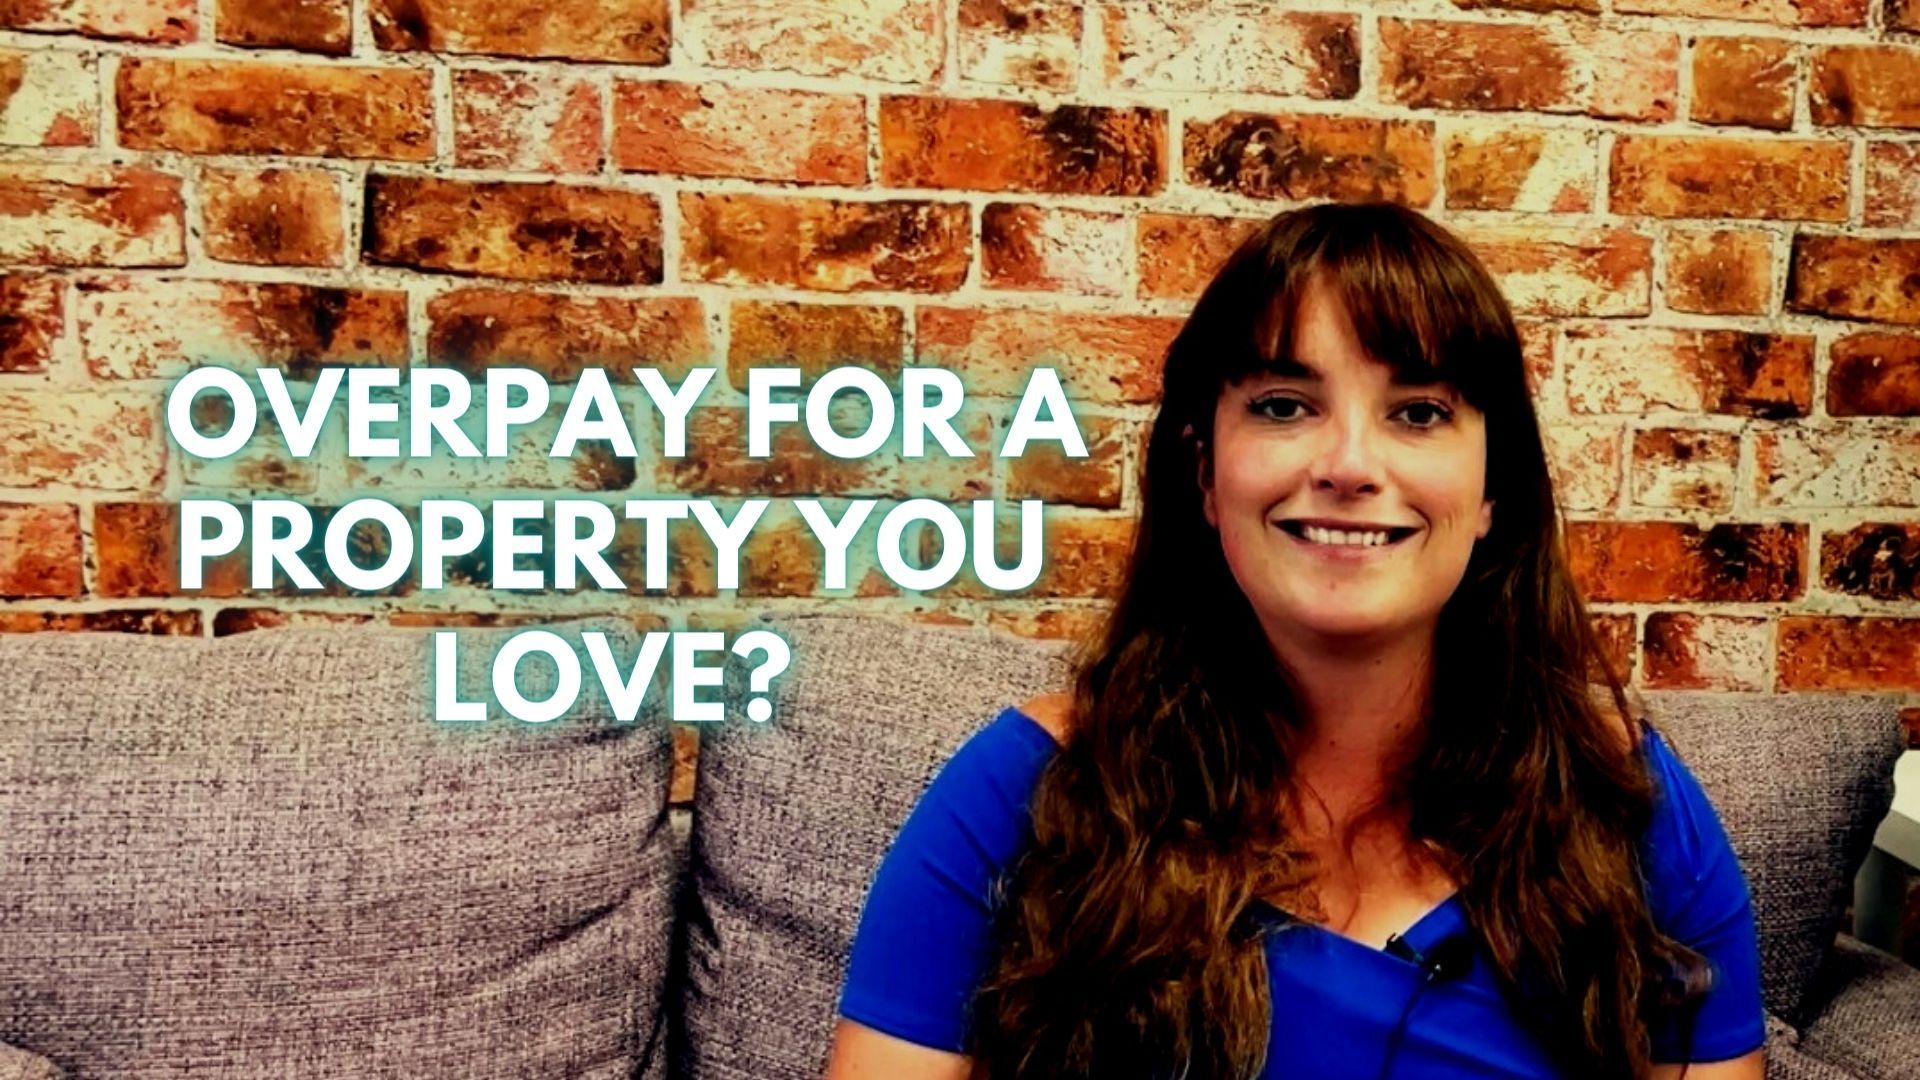 VIDEO: Should You Overpay For A Property You Love?